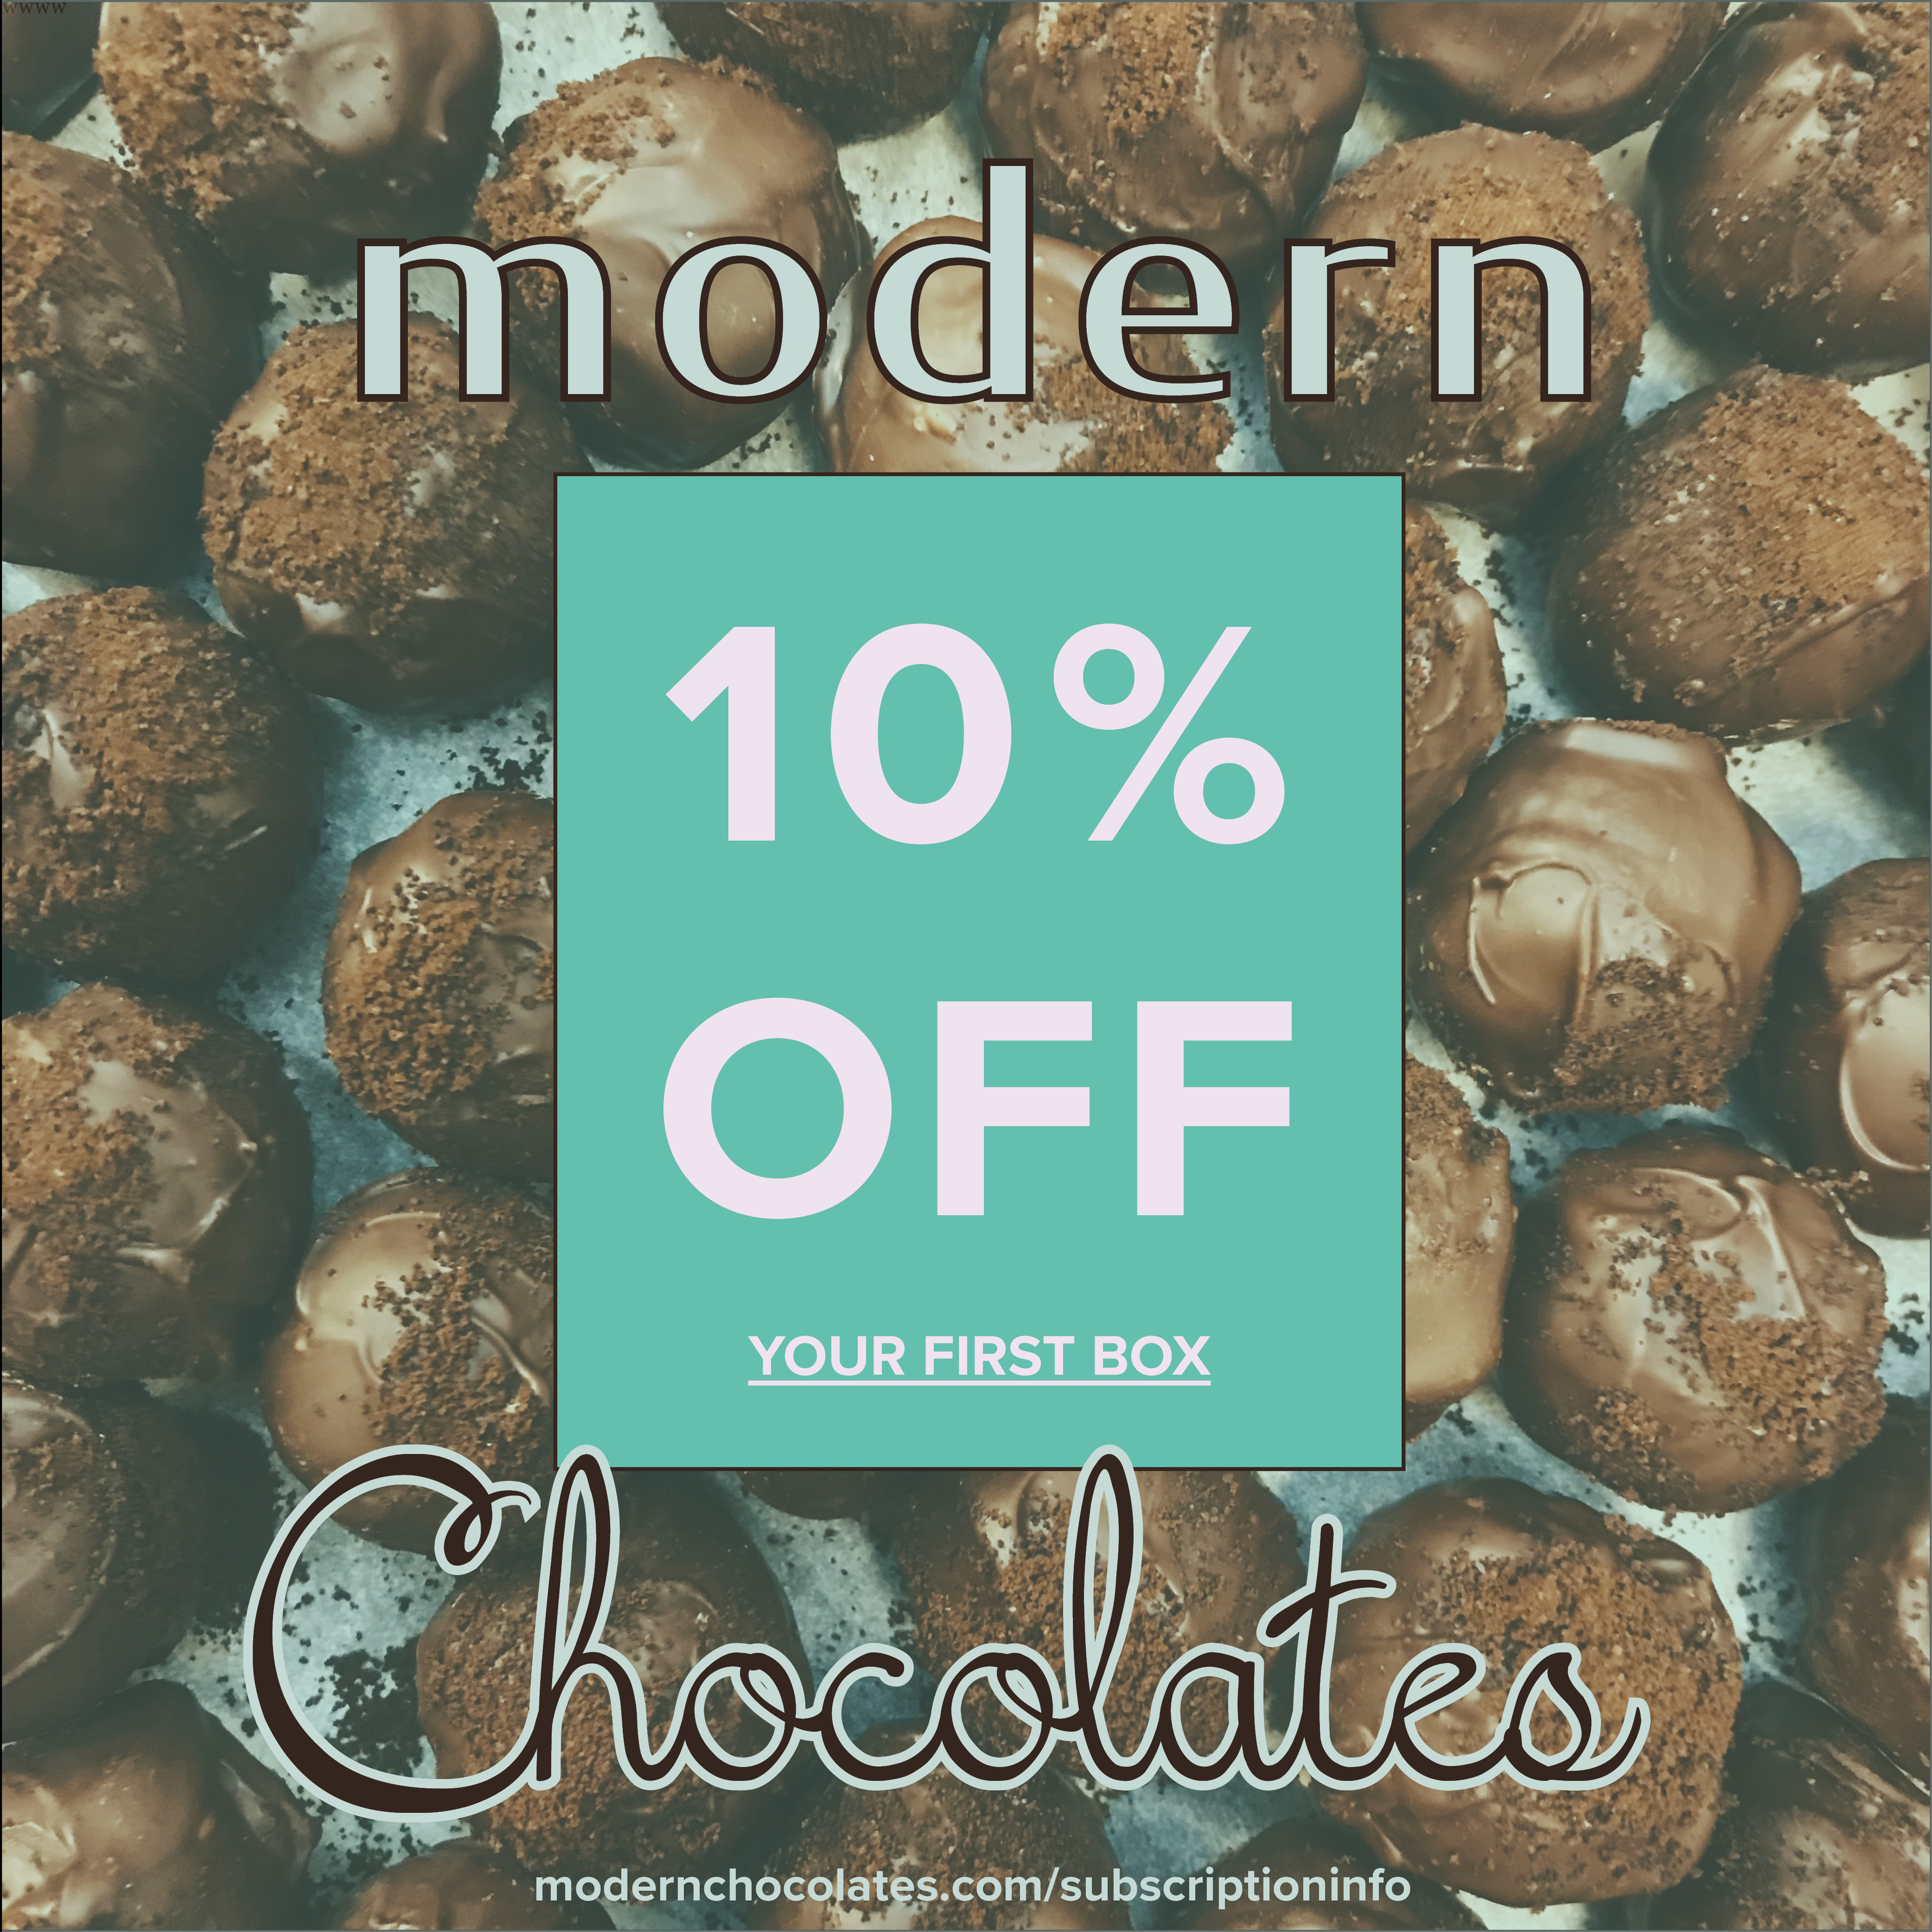 Ten Percent Off Ad for Modern Chocolates. 